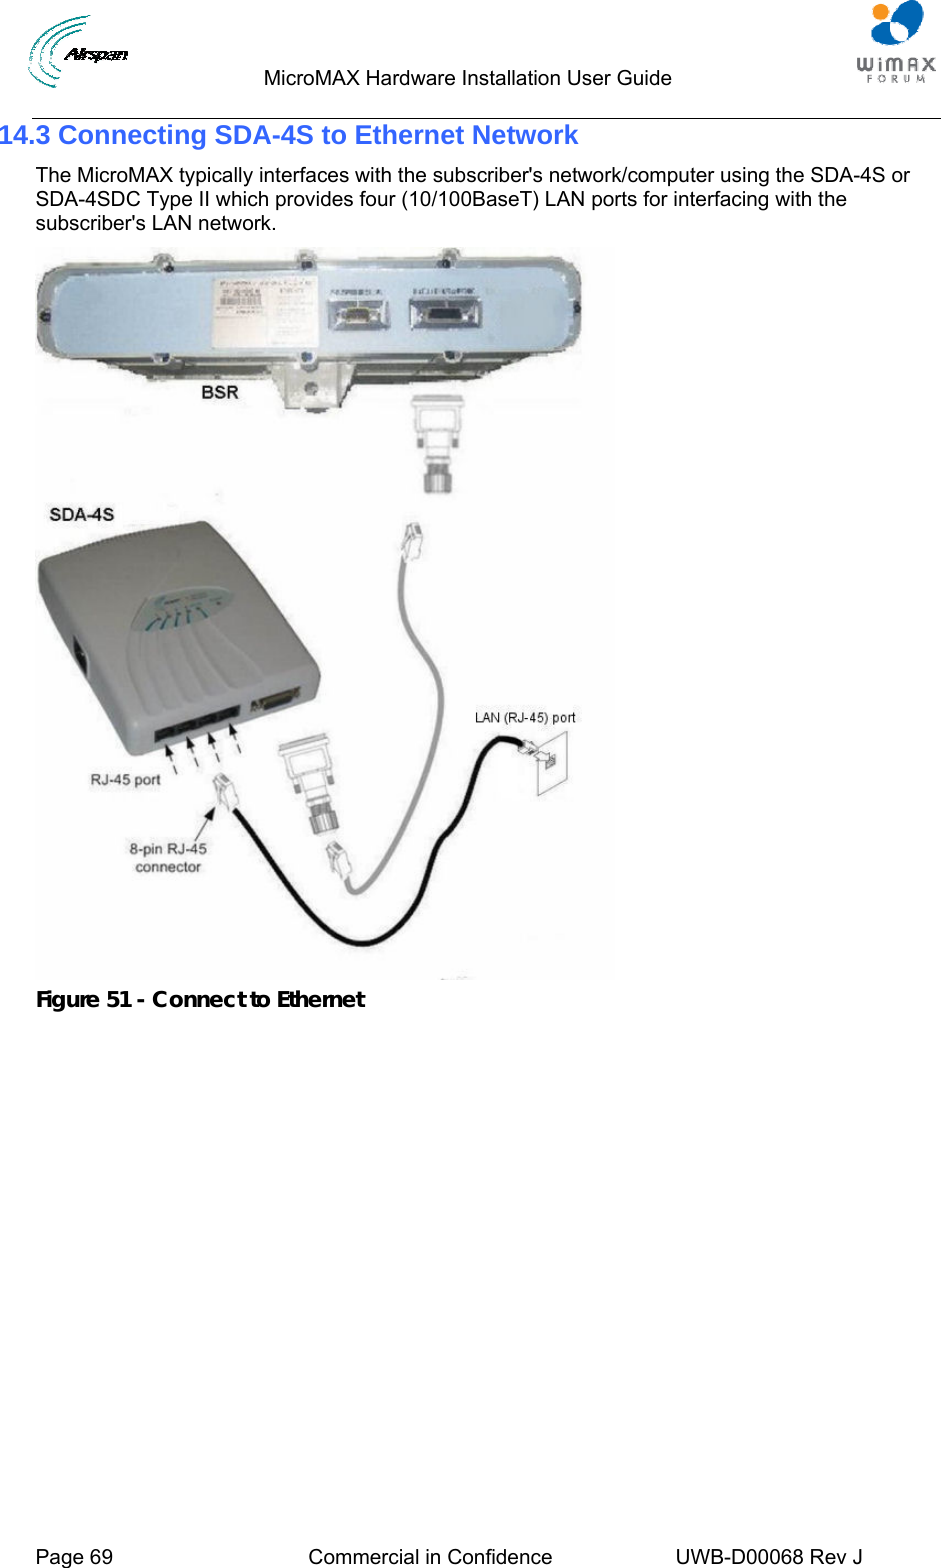                                  MicroMAX Hardware Installation User Guide     Page 69  Commercial in Confidence  UWB-D00068 Rev J   14.3 Connecting SDA-4S to Ethernet Network The MicroMAX typically interfaces with the subscriber&apos;s network/computer using the SDA-4S or SDA-4SDC Type II which provides four (10/100BaseT) LAN ports for interfacing with the subscriber&apos;s LAN network.  Figure 51 - Connect to Ethernet 